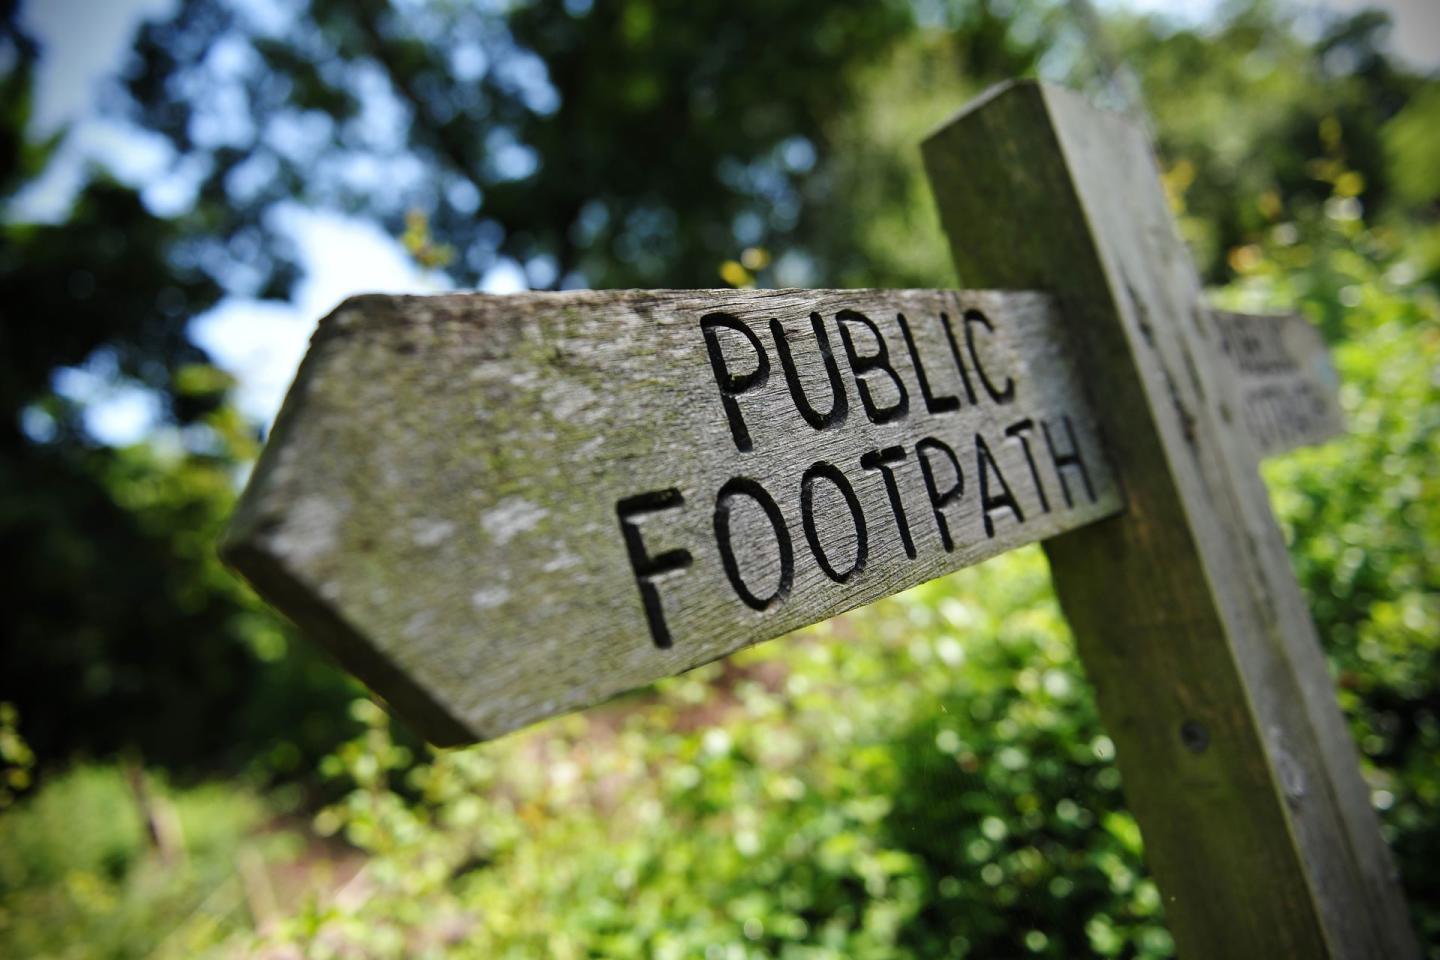 Public foot path sign in Oxfordshire